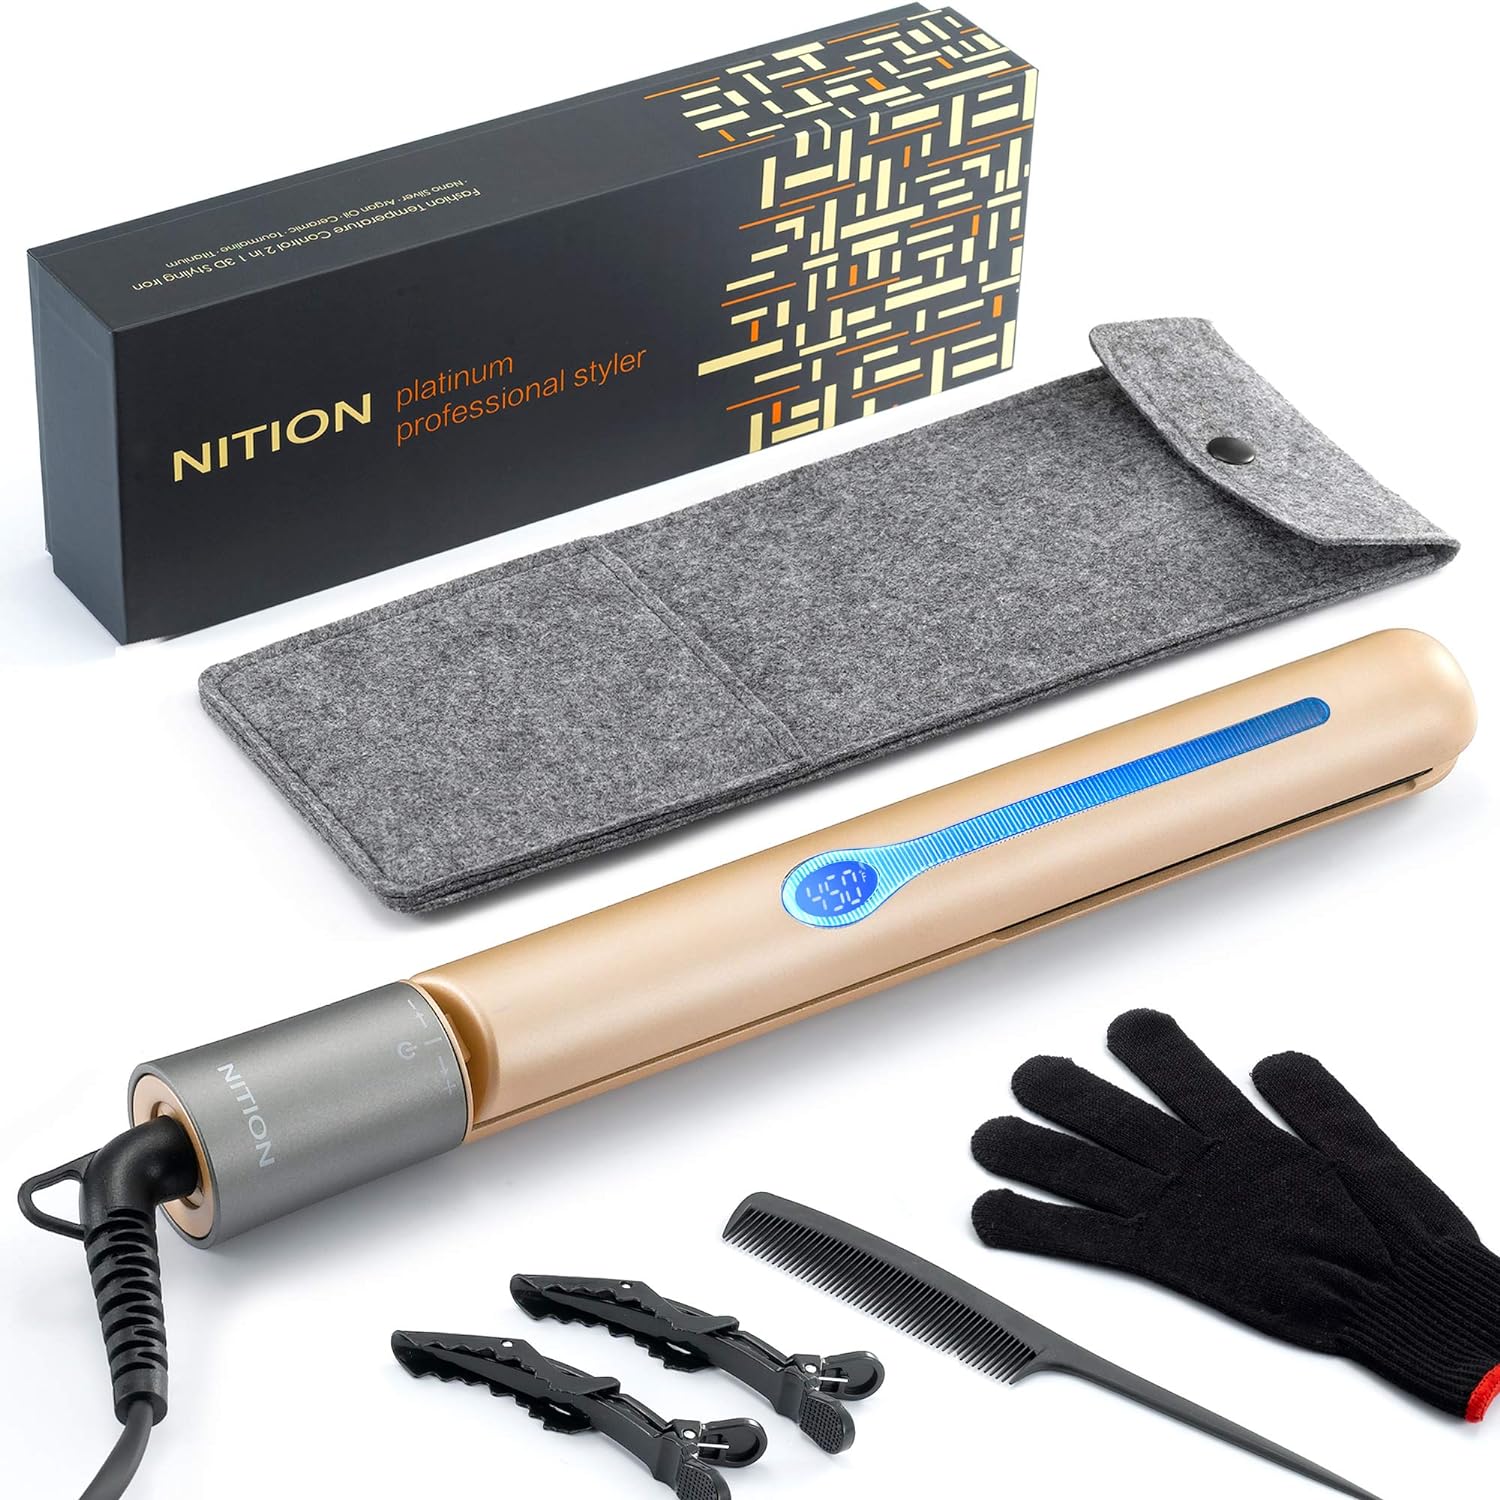 NITION Professional Salon Hair Straightener and Curler